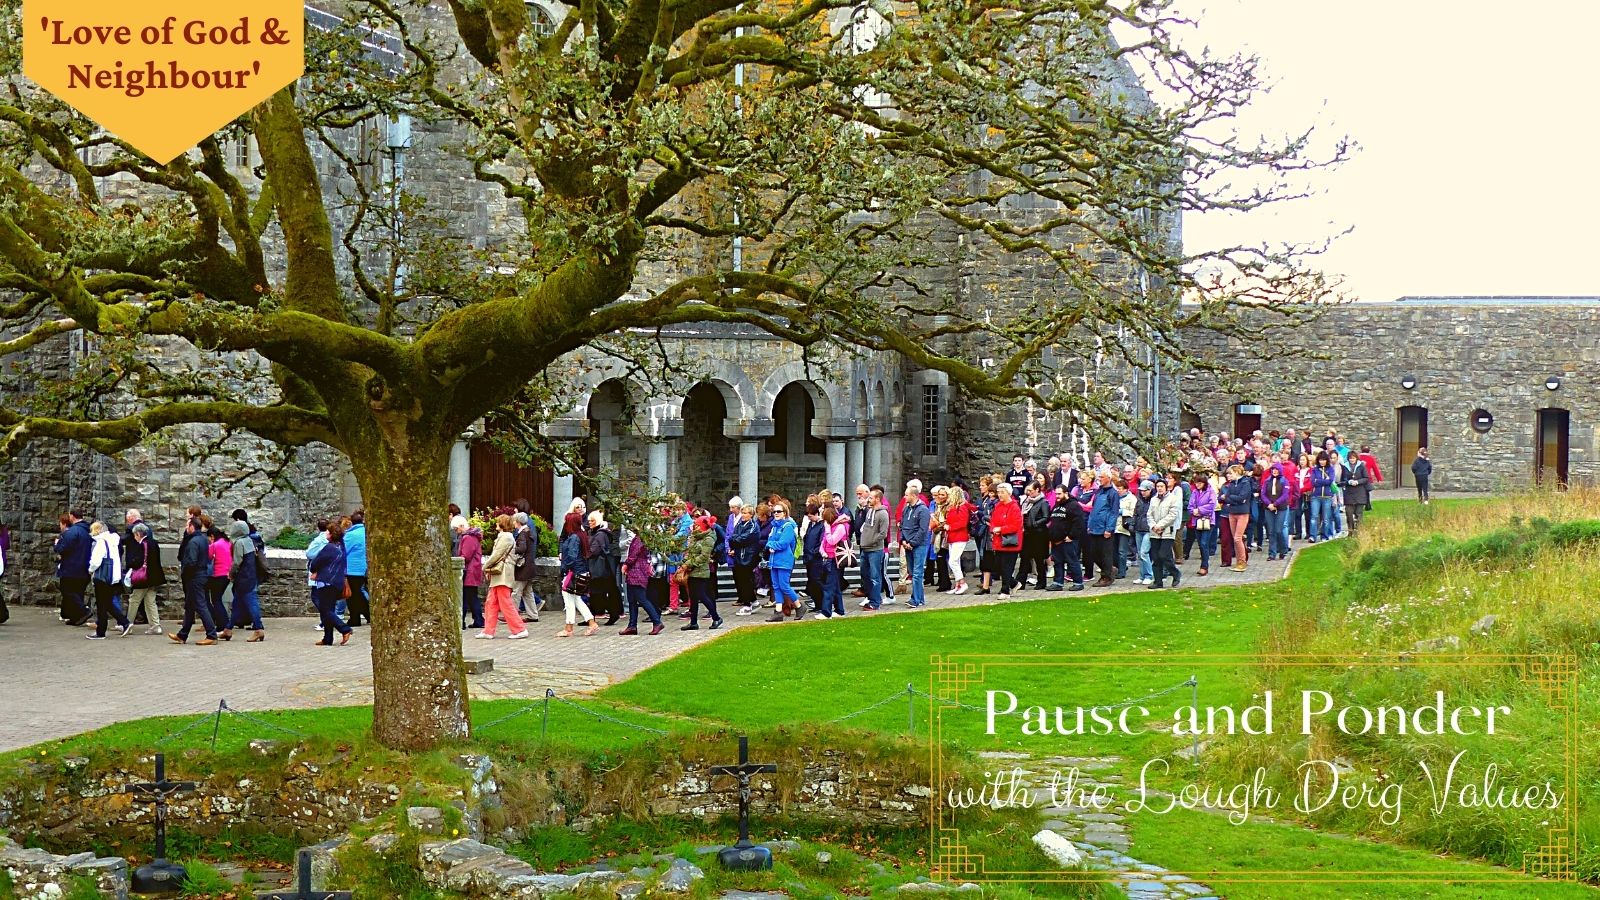 Pause and Ponder with the Lough Derg values - Love of God with Fr La